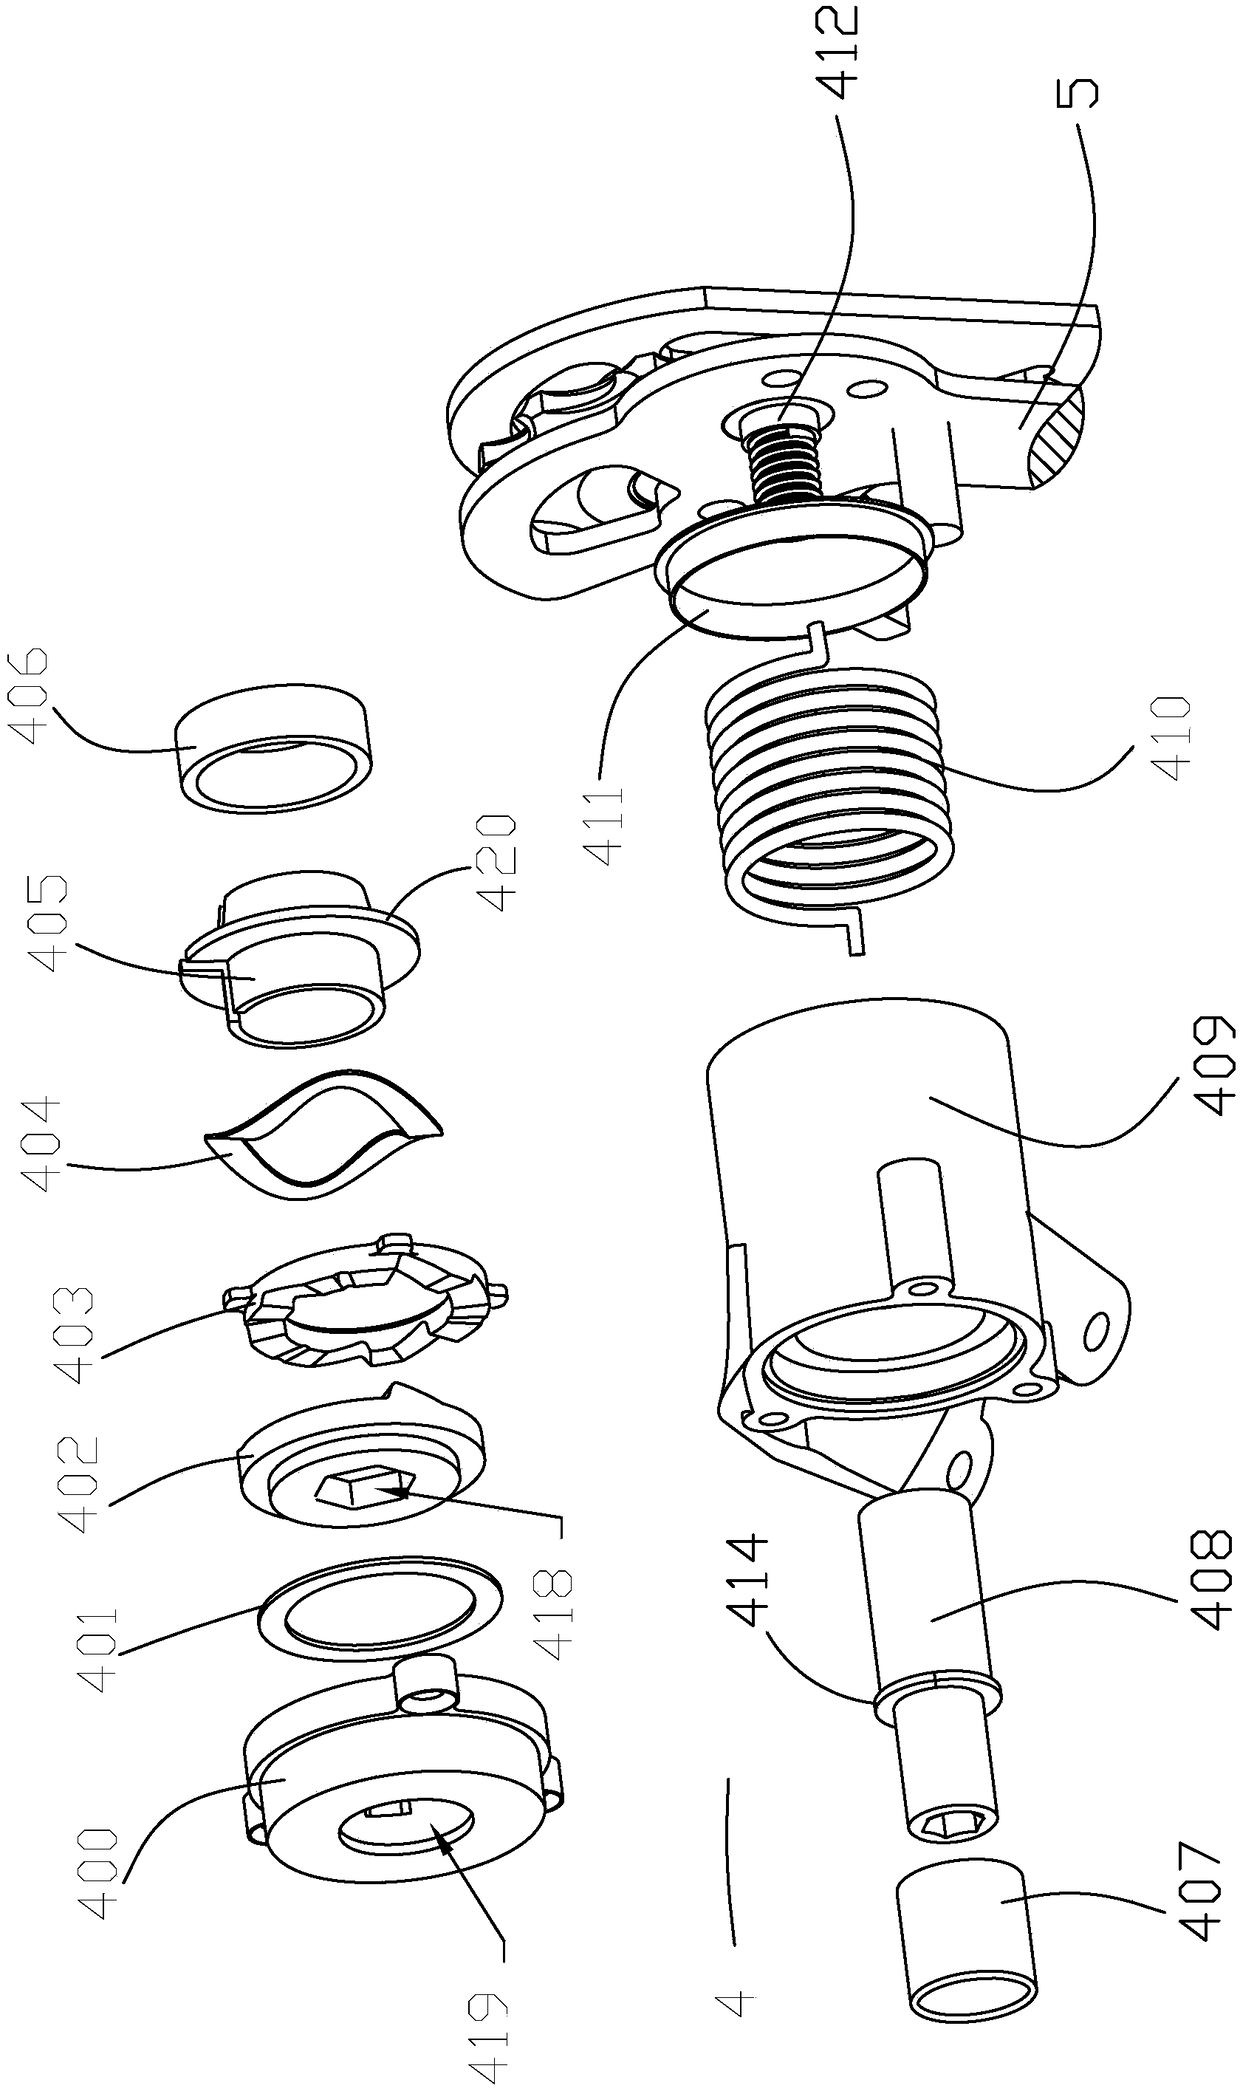 Chain tension adjustment device for bicycle rear derailleur